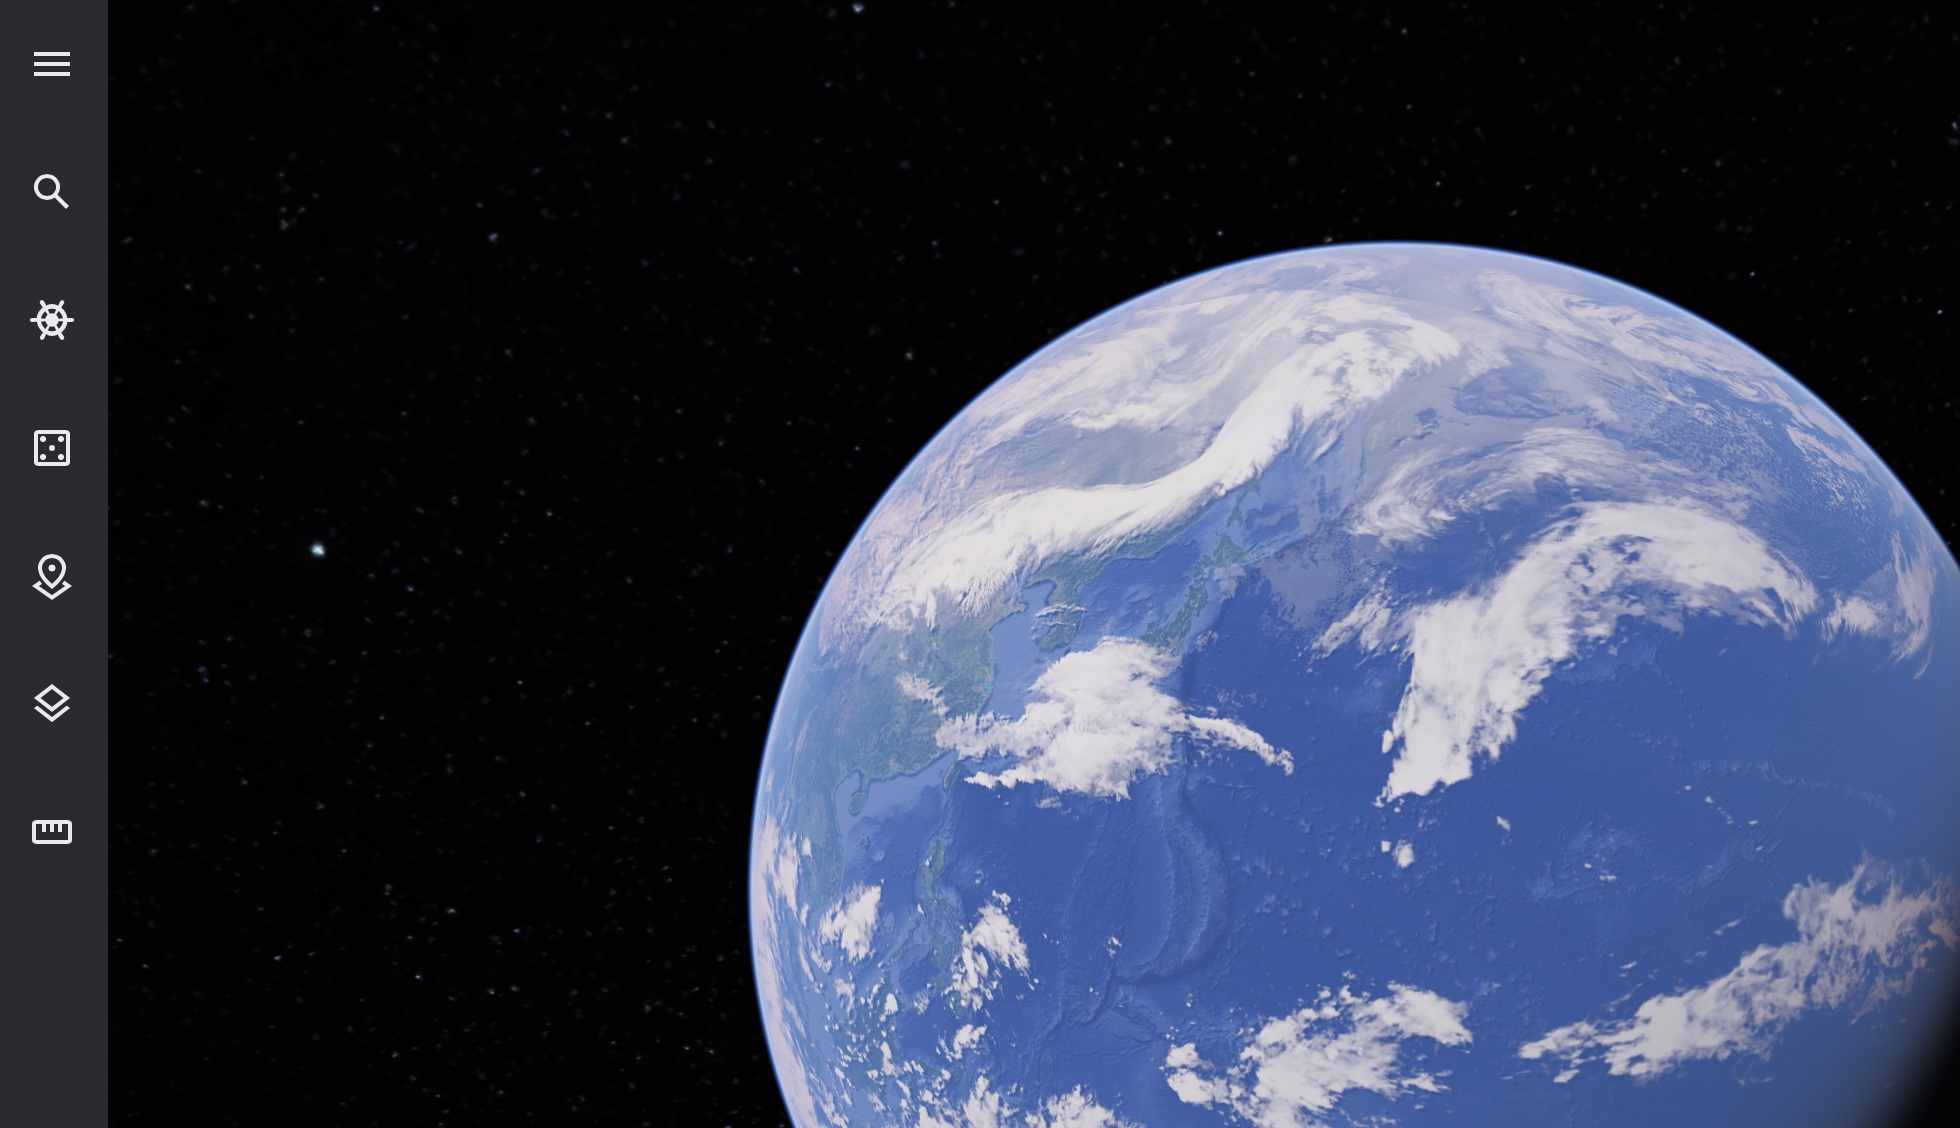 How to hide the atmosphere on Google Earth